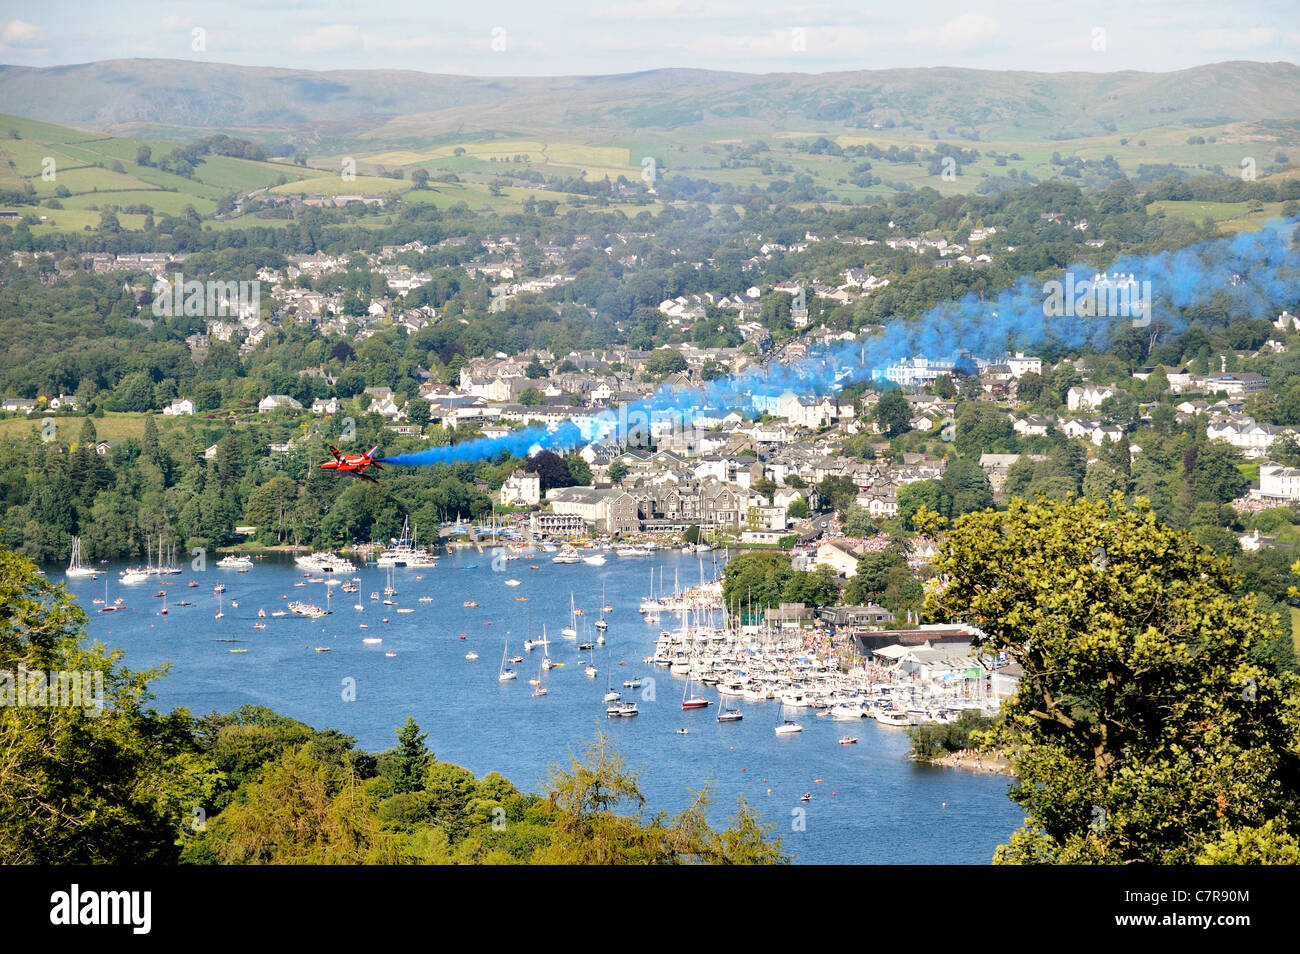 Red Arrows Royal Air Force Aerobatic Team. A BAE Hawk T1A at speed overflies Bowness during Windermere Air Festival, Cumbria, UK Stock Photo